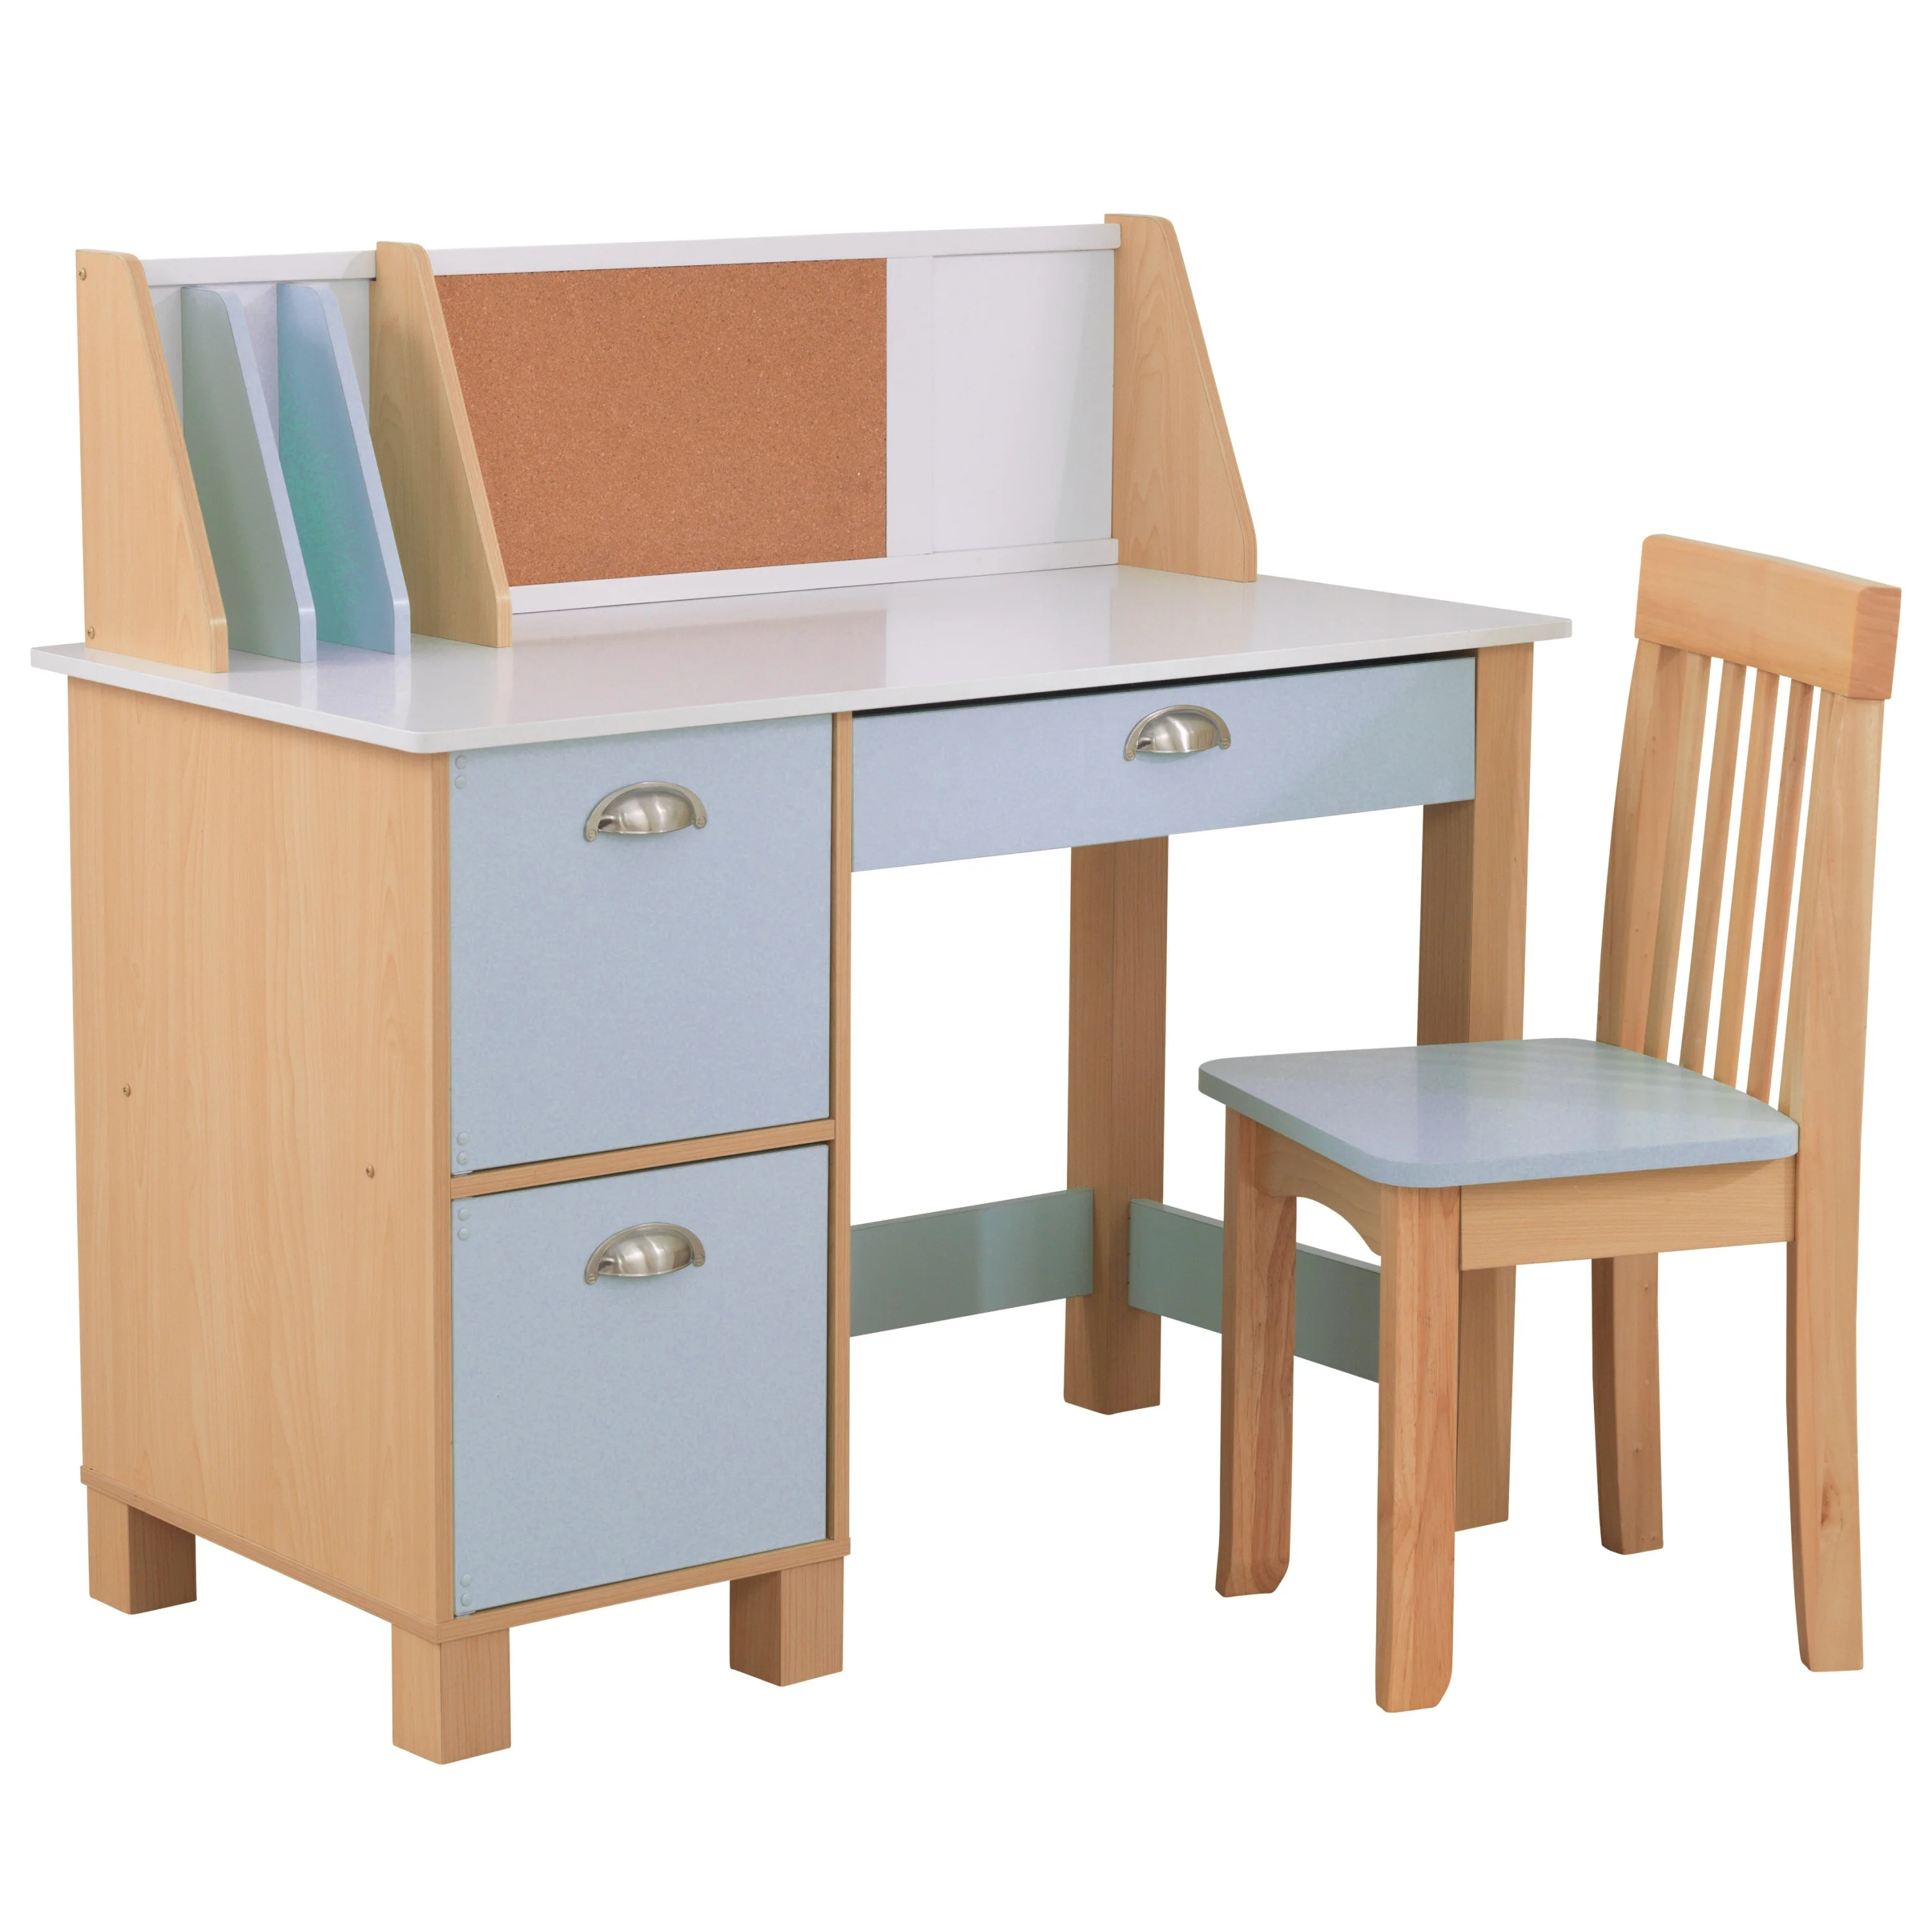 NOVA High Gloss Children Study Desk And Chair Kids' Table With Chair Sets